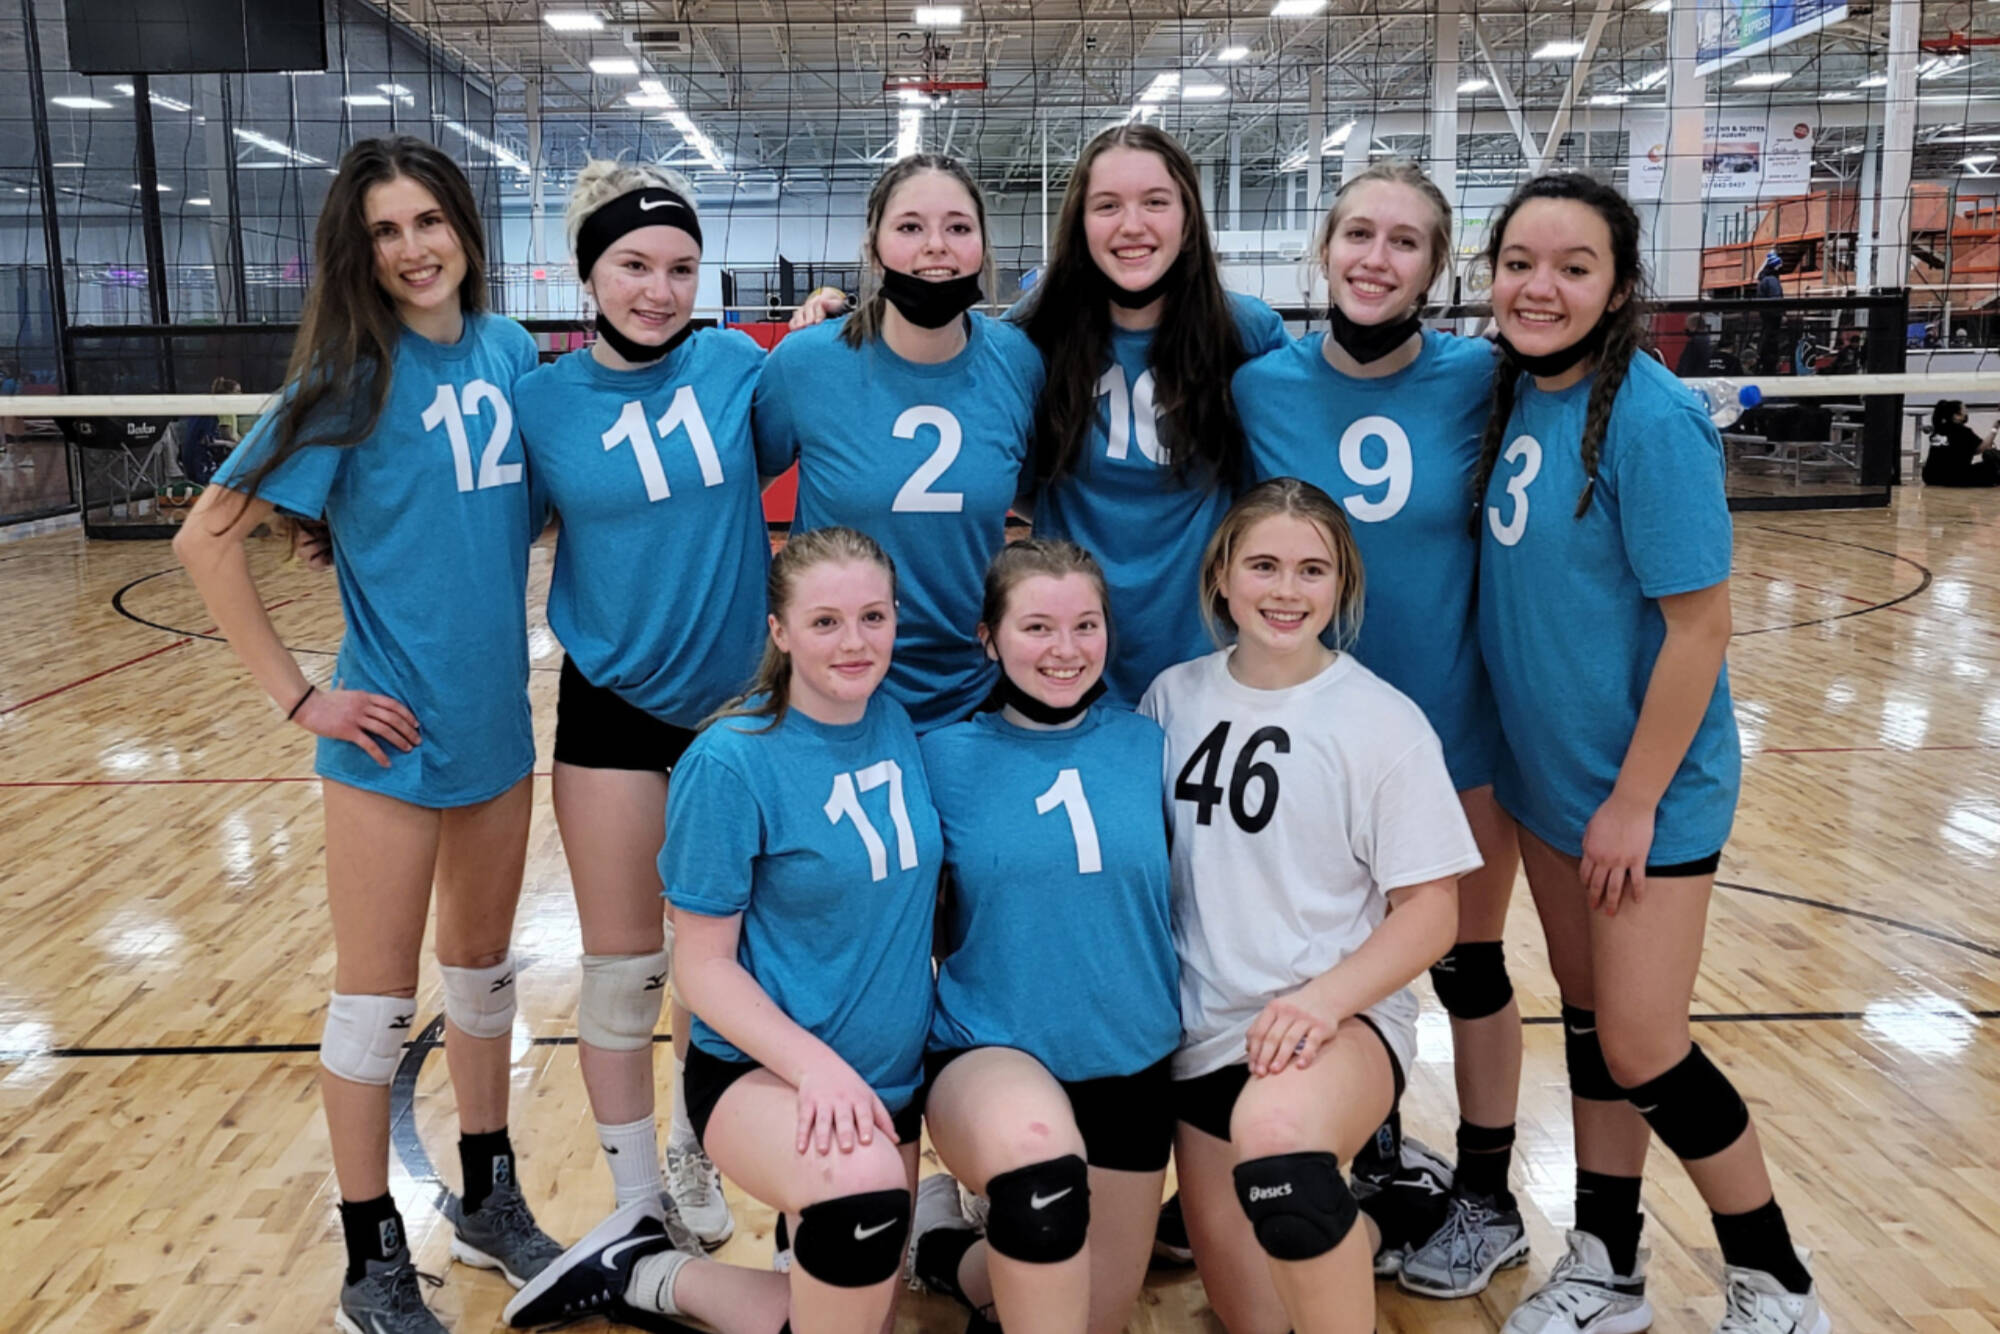 Courtesy of Christine Halberg
The Momentum One Volleyball Academy U18 Tsunami won the silver division at its first tournament of the season in Auburn earlier in December. From left, back row, are Emi Halberg, Alexis Perry, Jasmine Messinger, Ava Hairell, Sam Robbins and Josephine Edgington. From left, front row, are Keana Rowley, Jayde Wold and Lily Halberg.